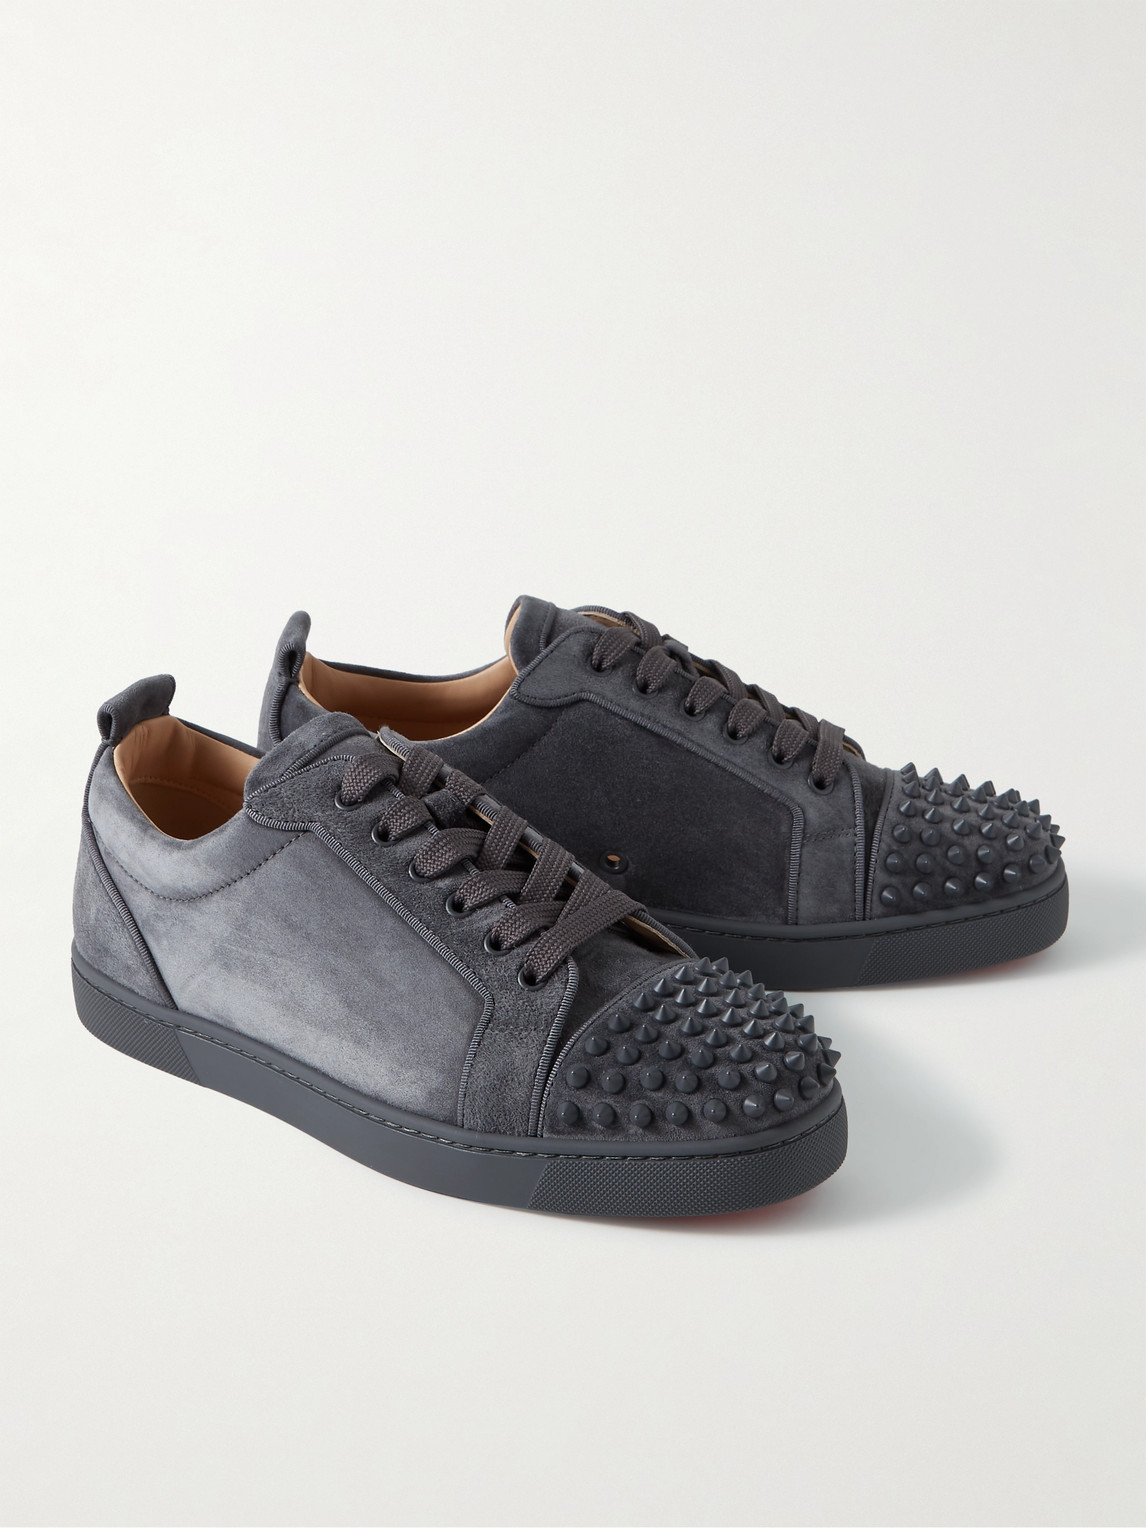 Shop Christian Louboutin Louis Junior Spikes Cap-toe Suede Sneakers In Gray